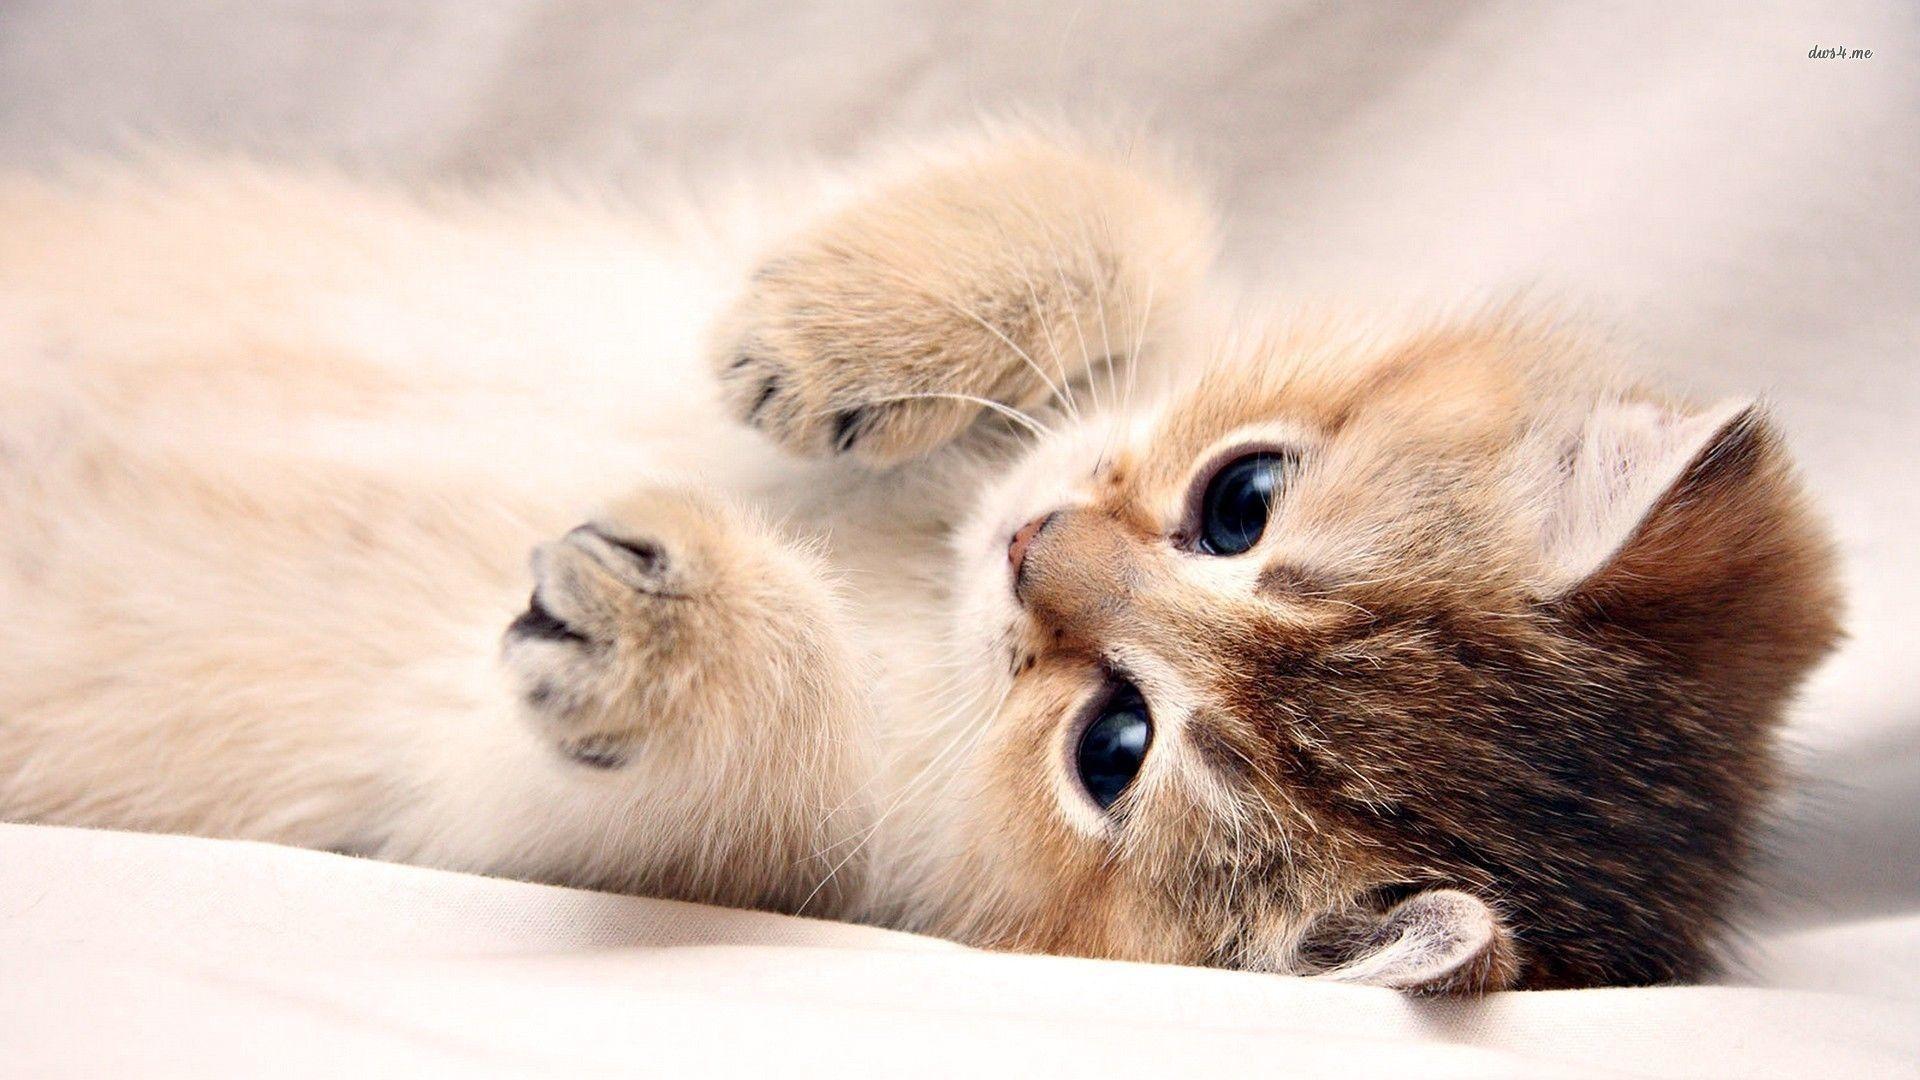 Cats and Kittens Desktop Wallpapers   Top Free Cats and Kittens ...